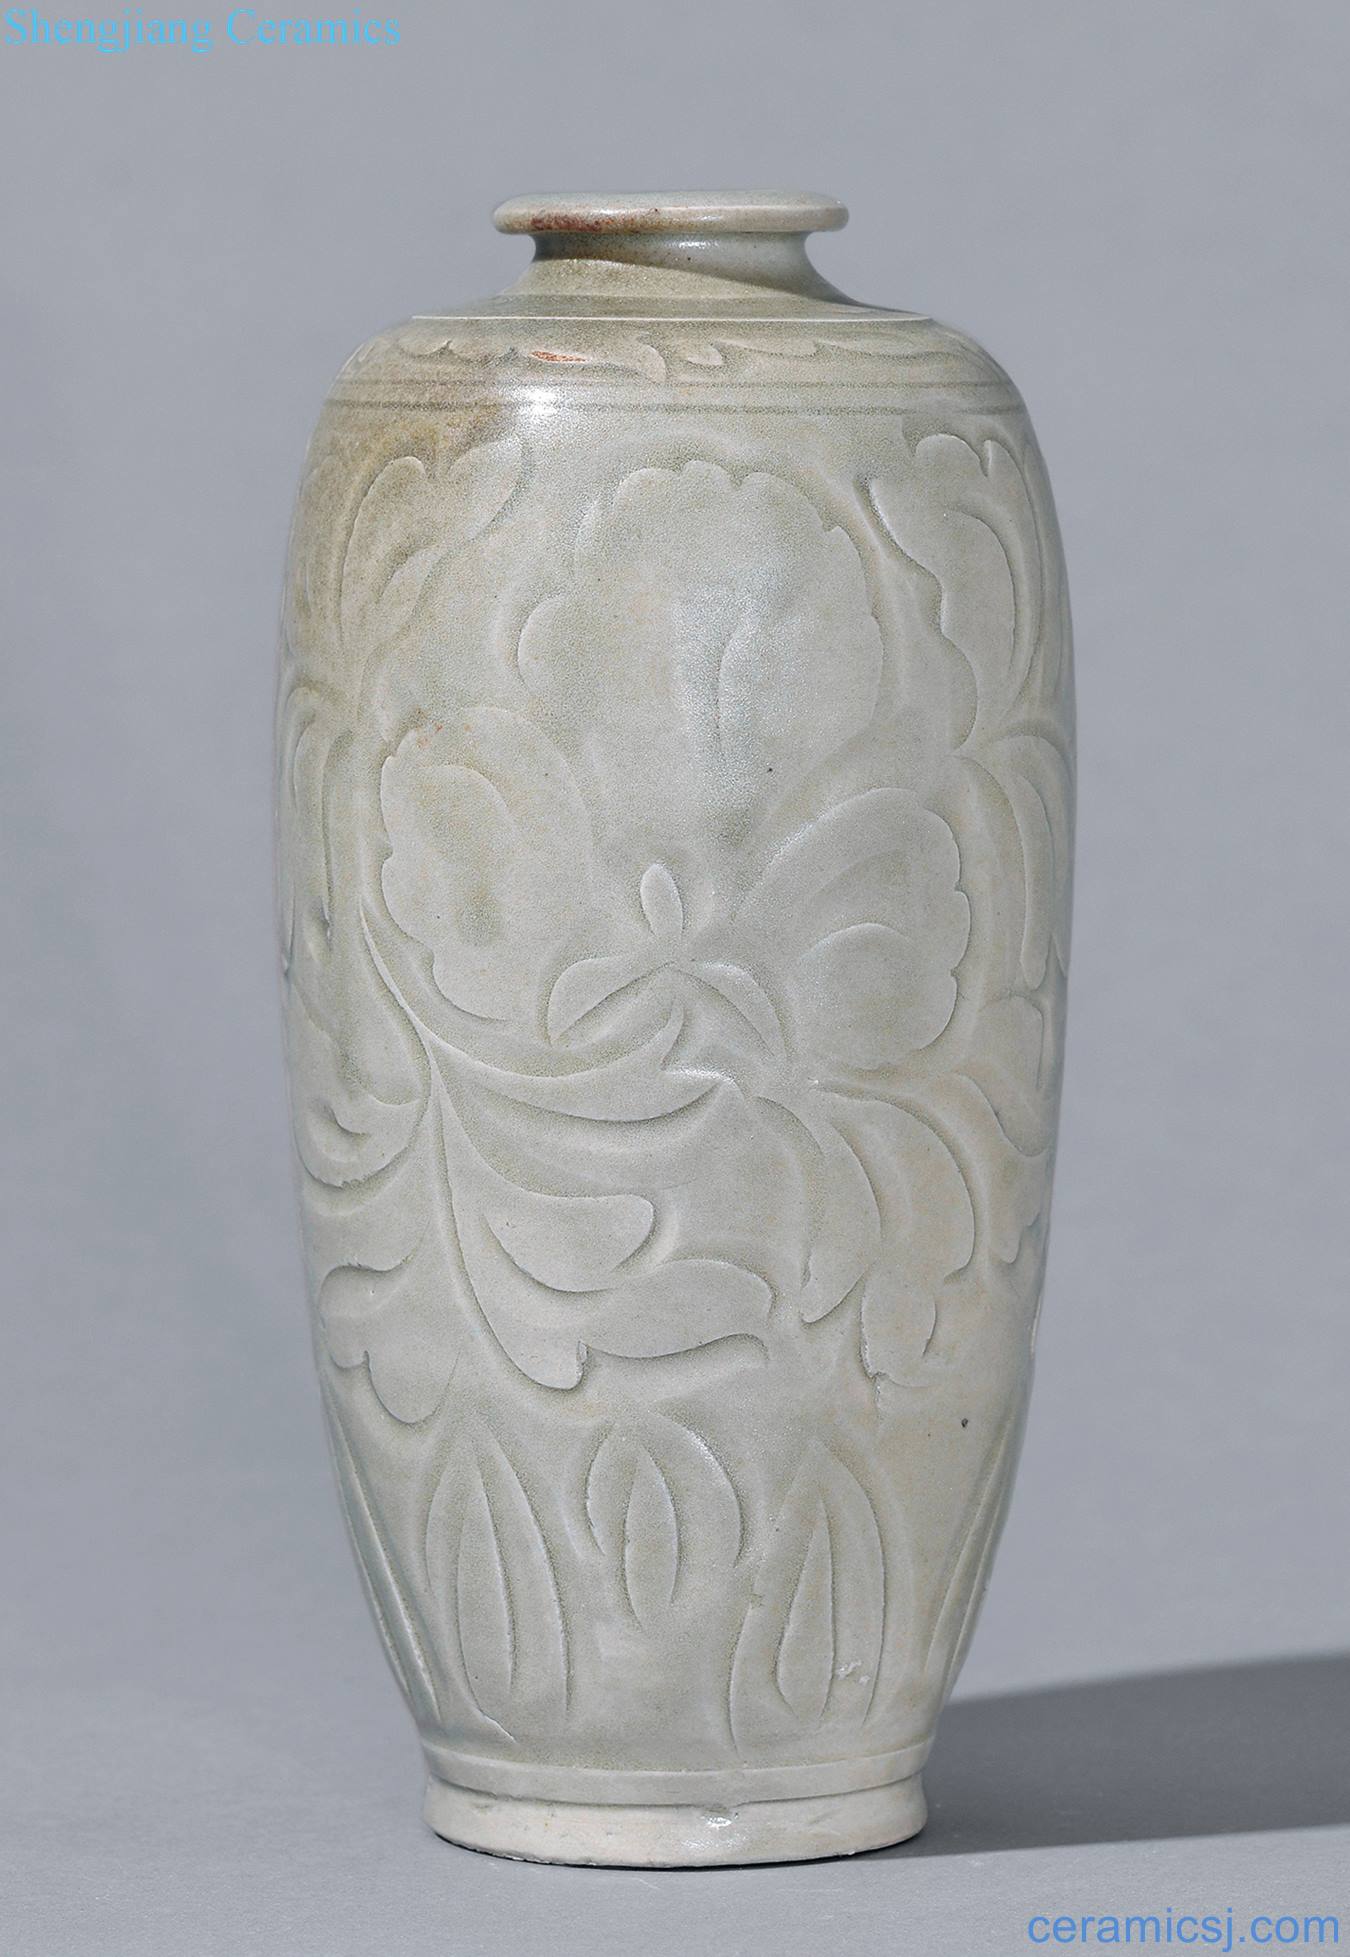 Northern song dynasty Yao state kiln carved plum bottle